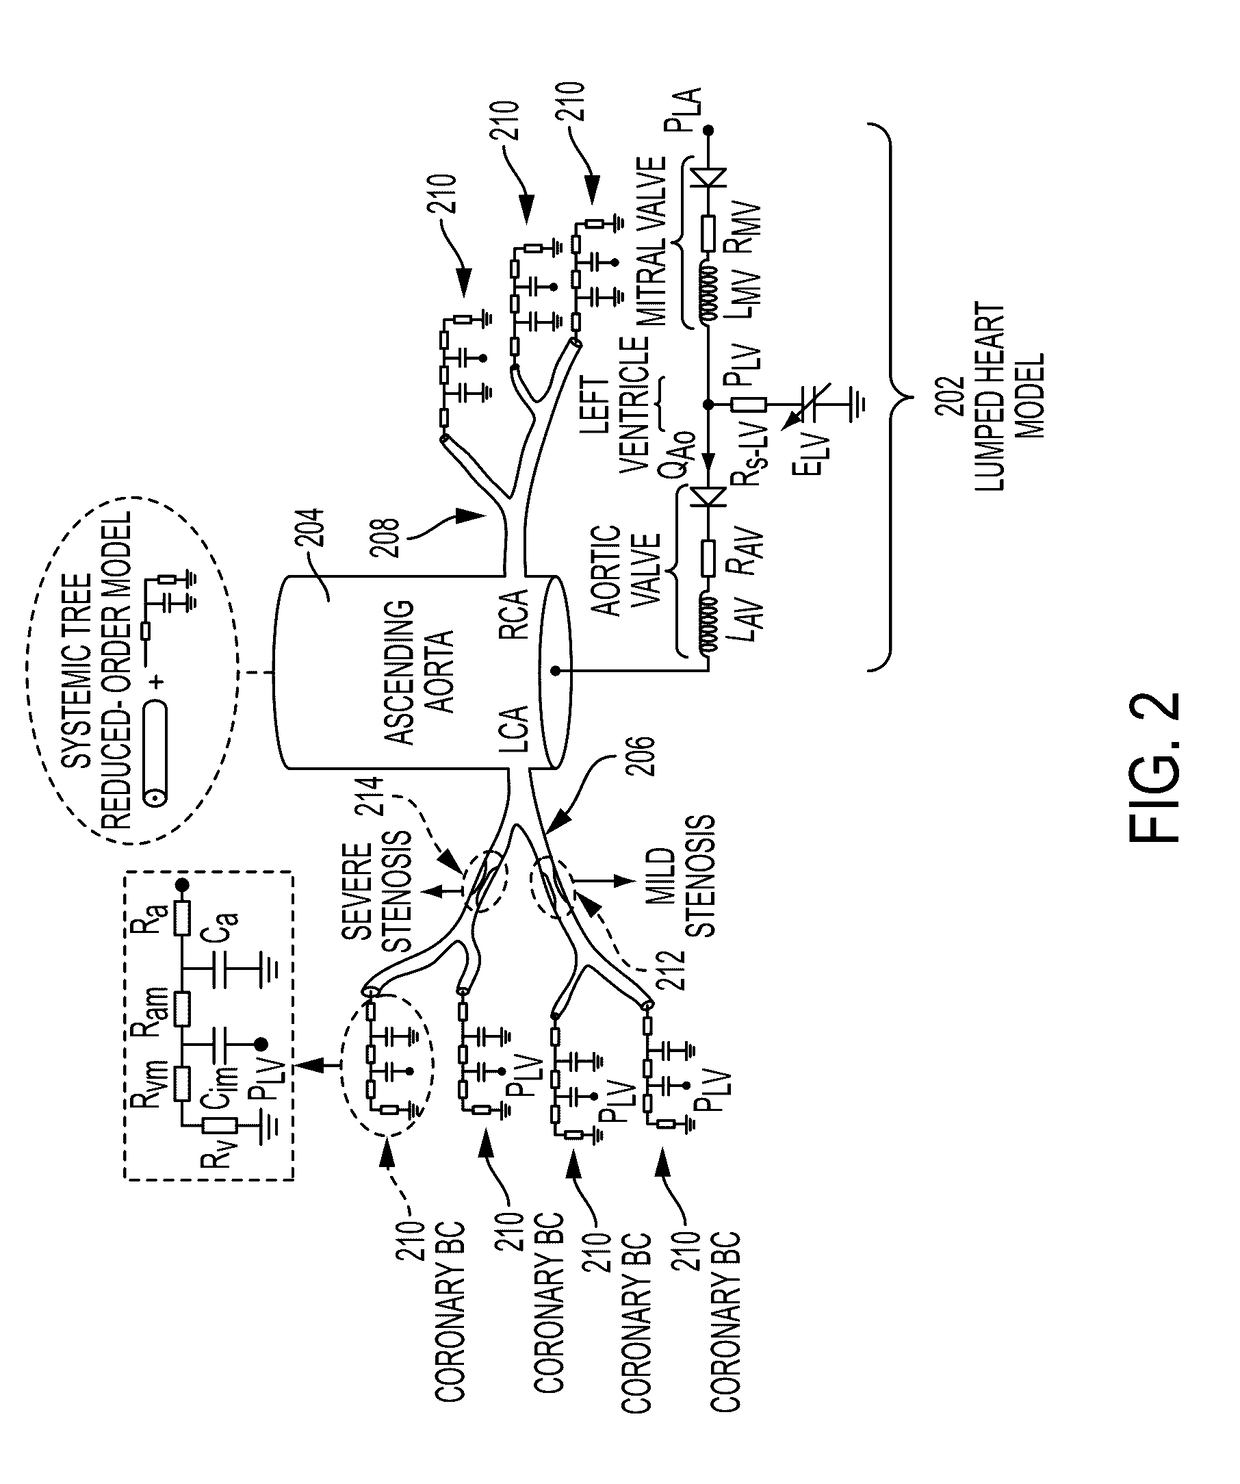 Method and system for non-invasive computation of hemodynamic indices for coronary artery stenosis